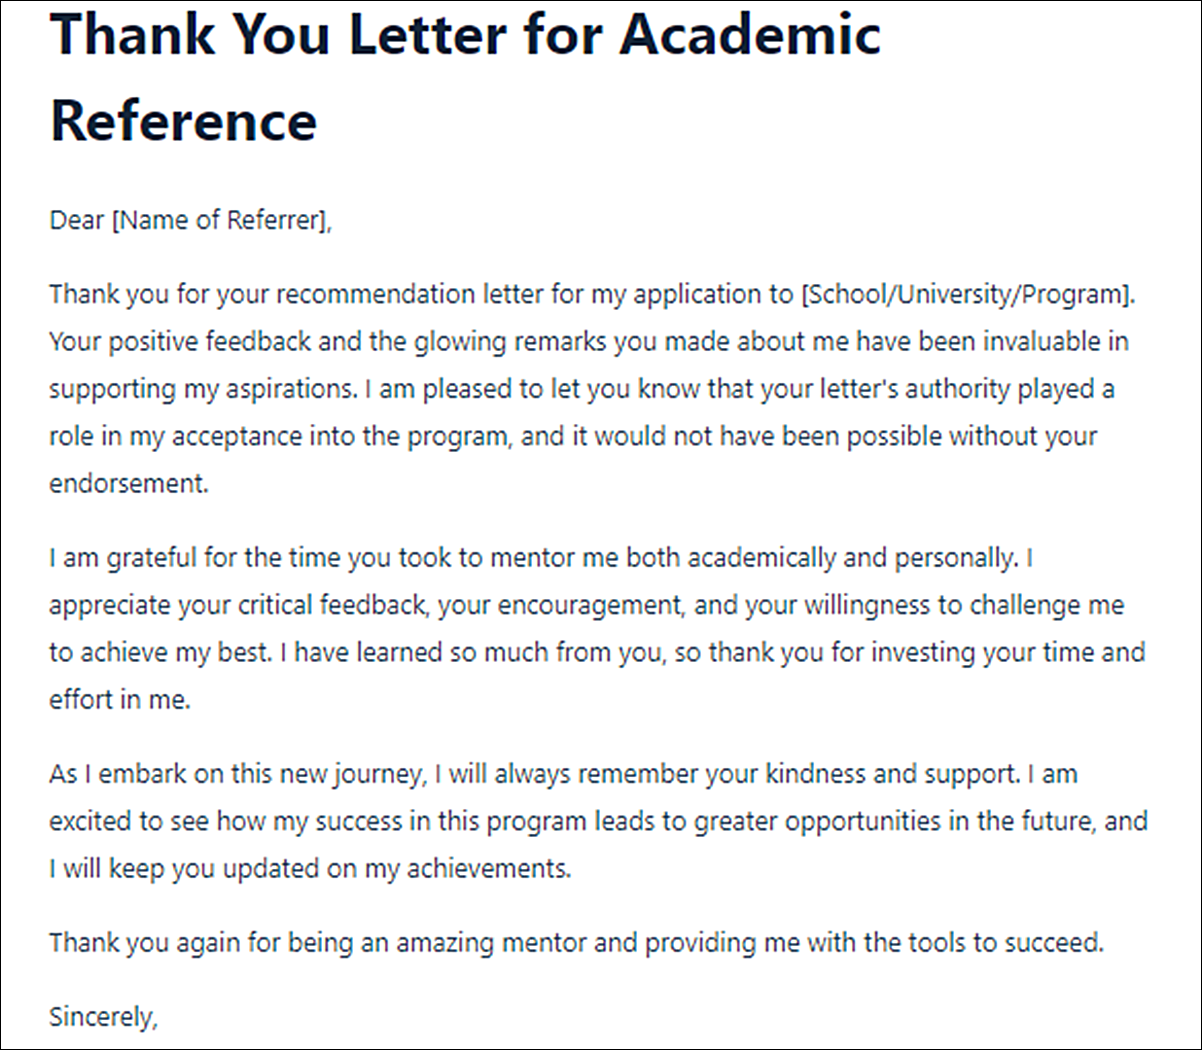 Thank You Letter for Letter of Recommendation Template